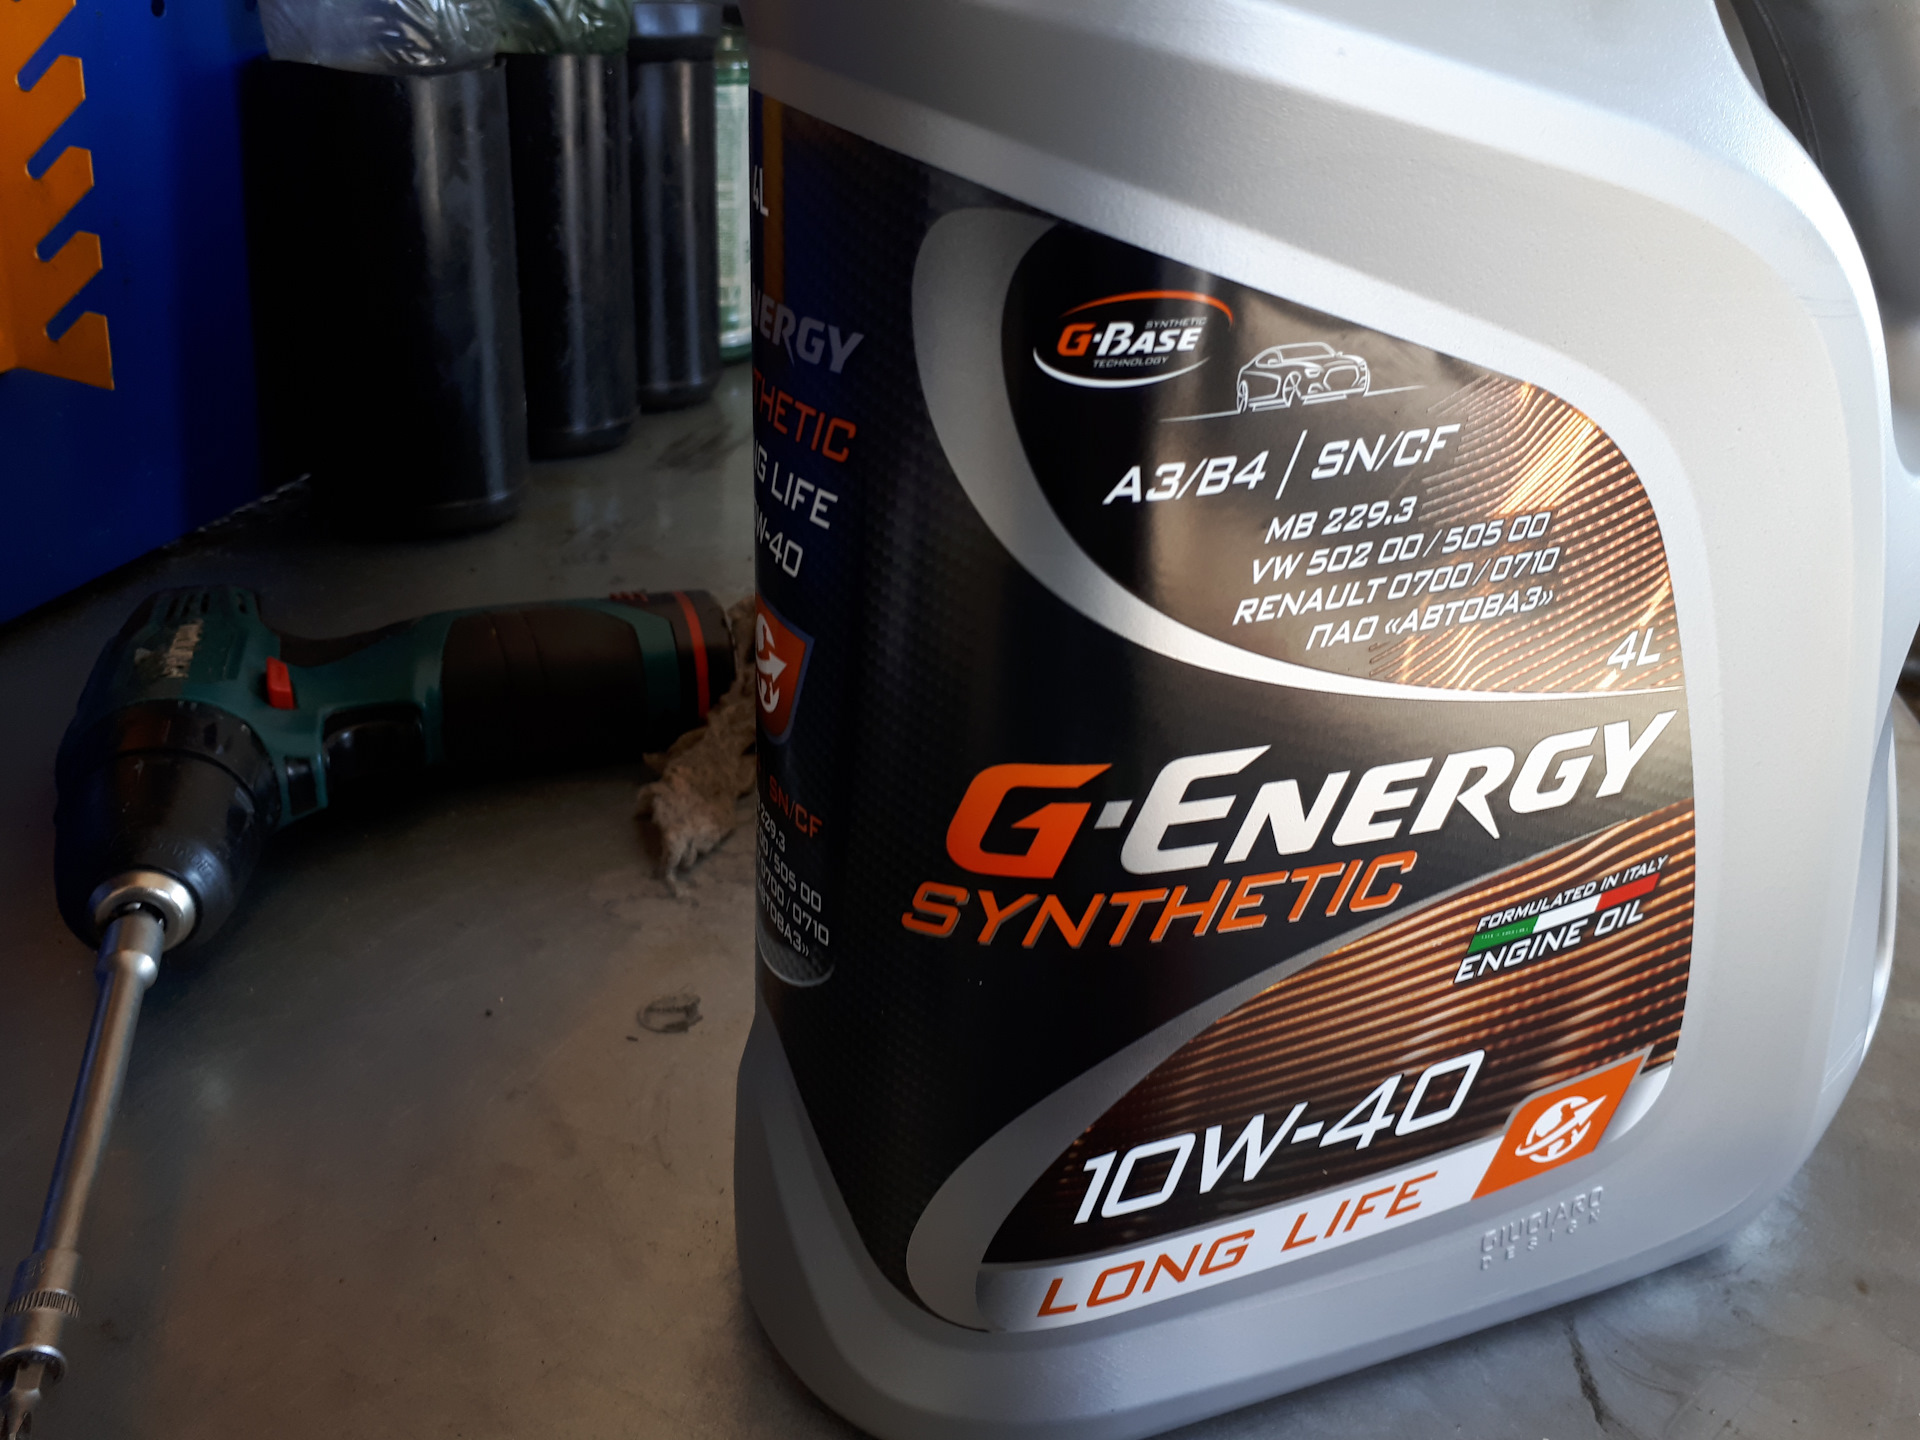 Масло g energy synthetic 5w 40. Масло g Energy 10w 40 синтетика. G Energy 10w 40 для грузовиков. G Energy Synthetic 5w40. Джи Энерджи 10в40 синтетика грузовая.